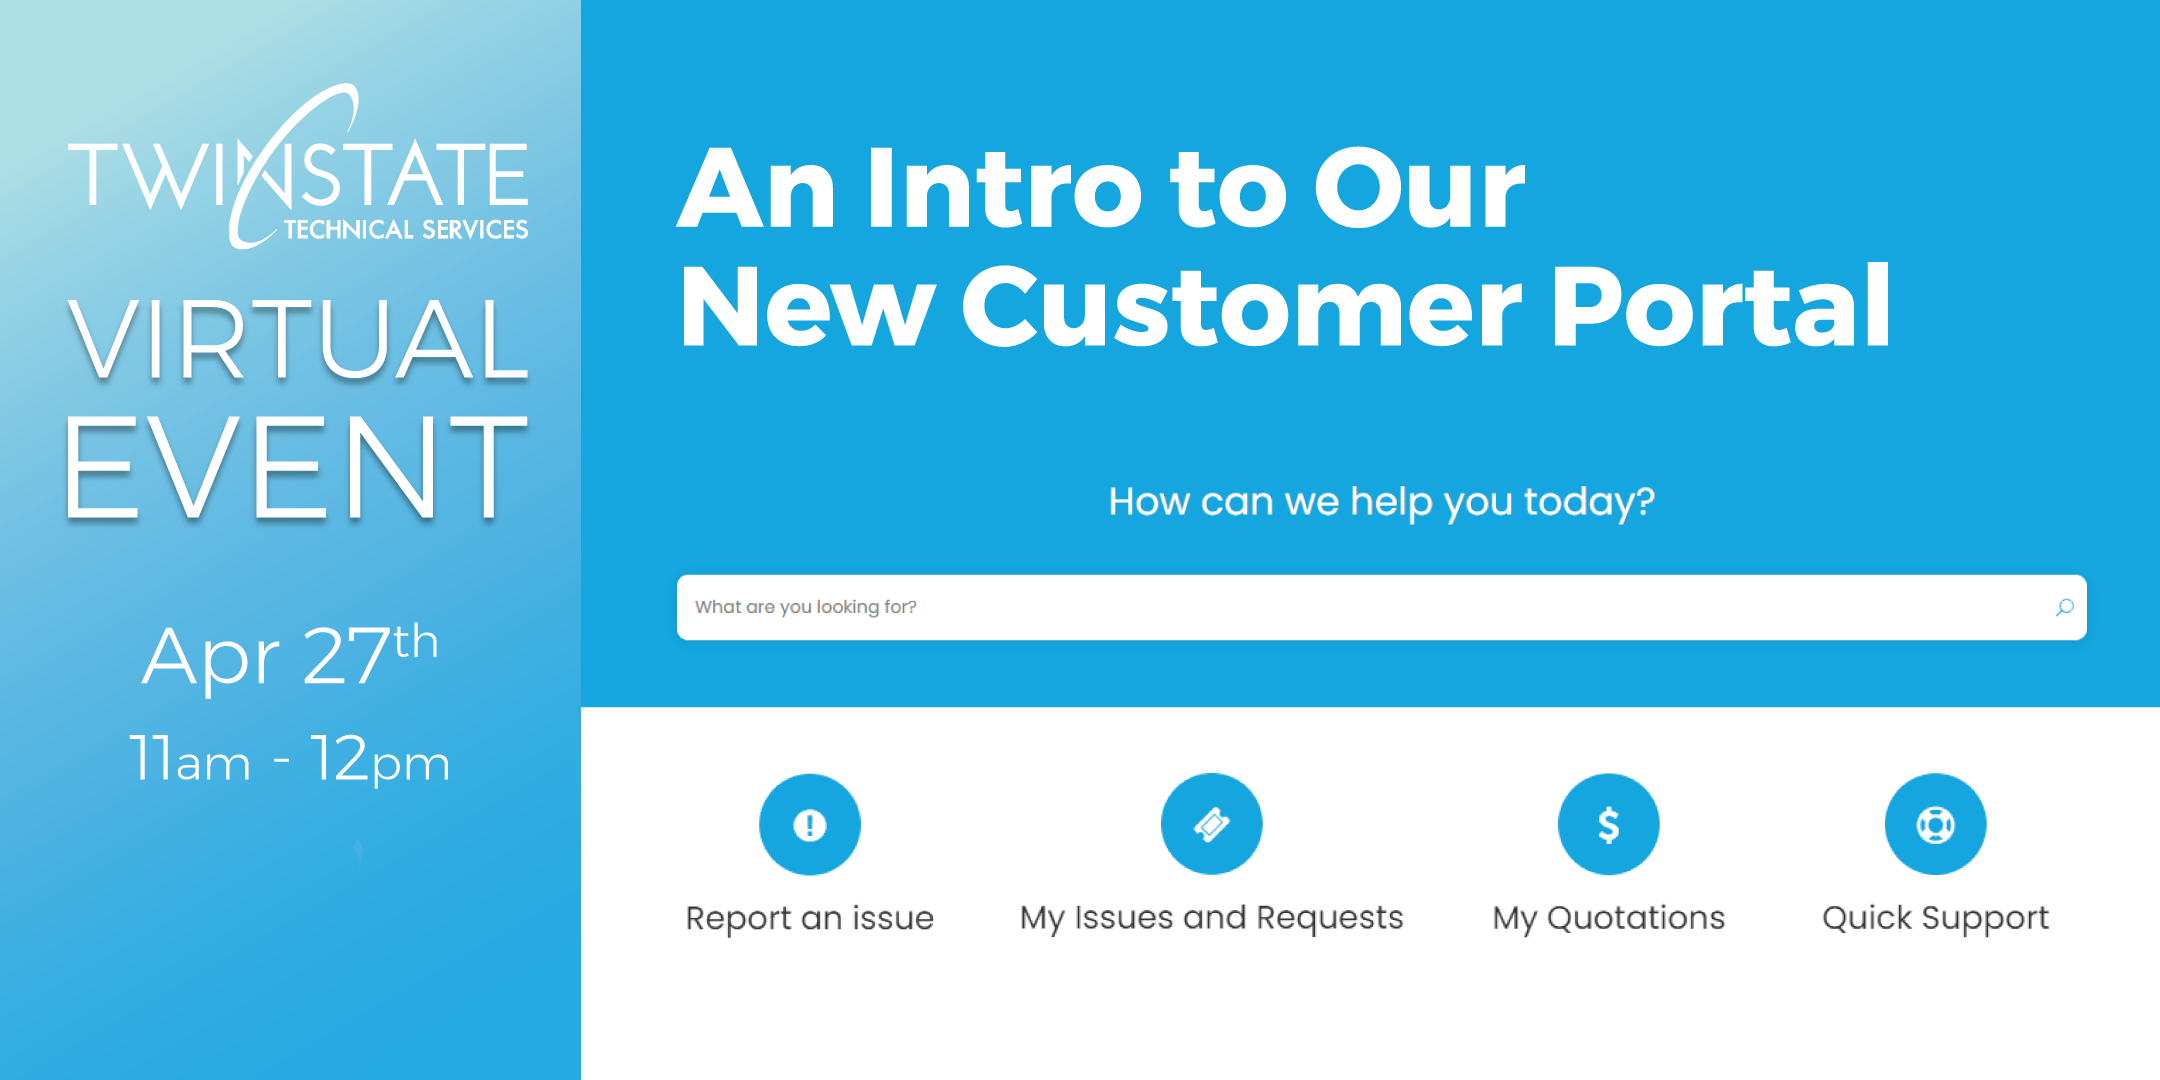 An Intro to Our New Customer Portal